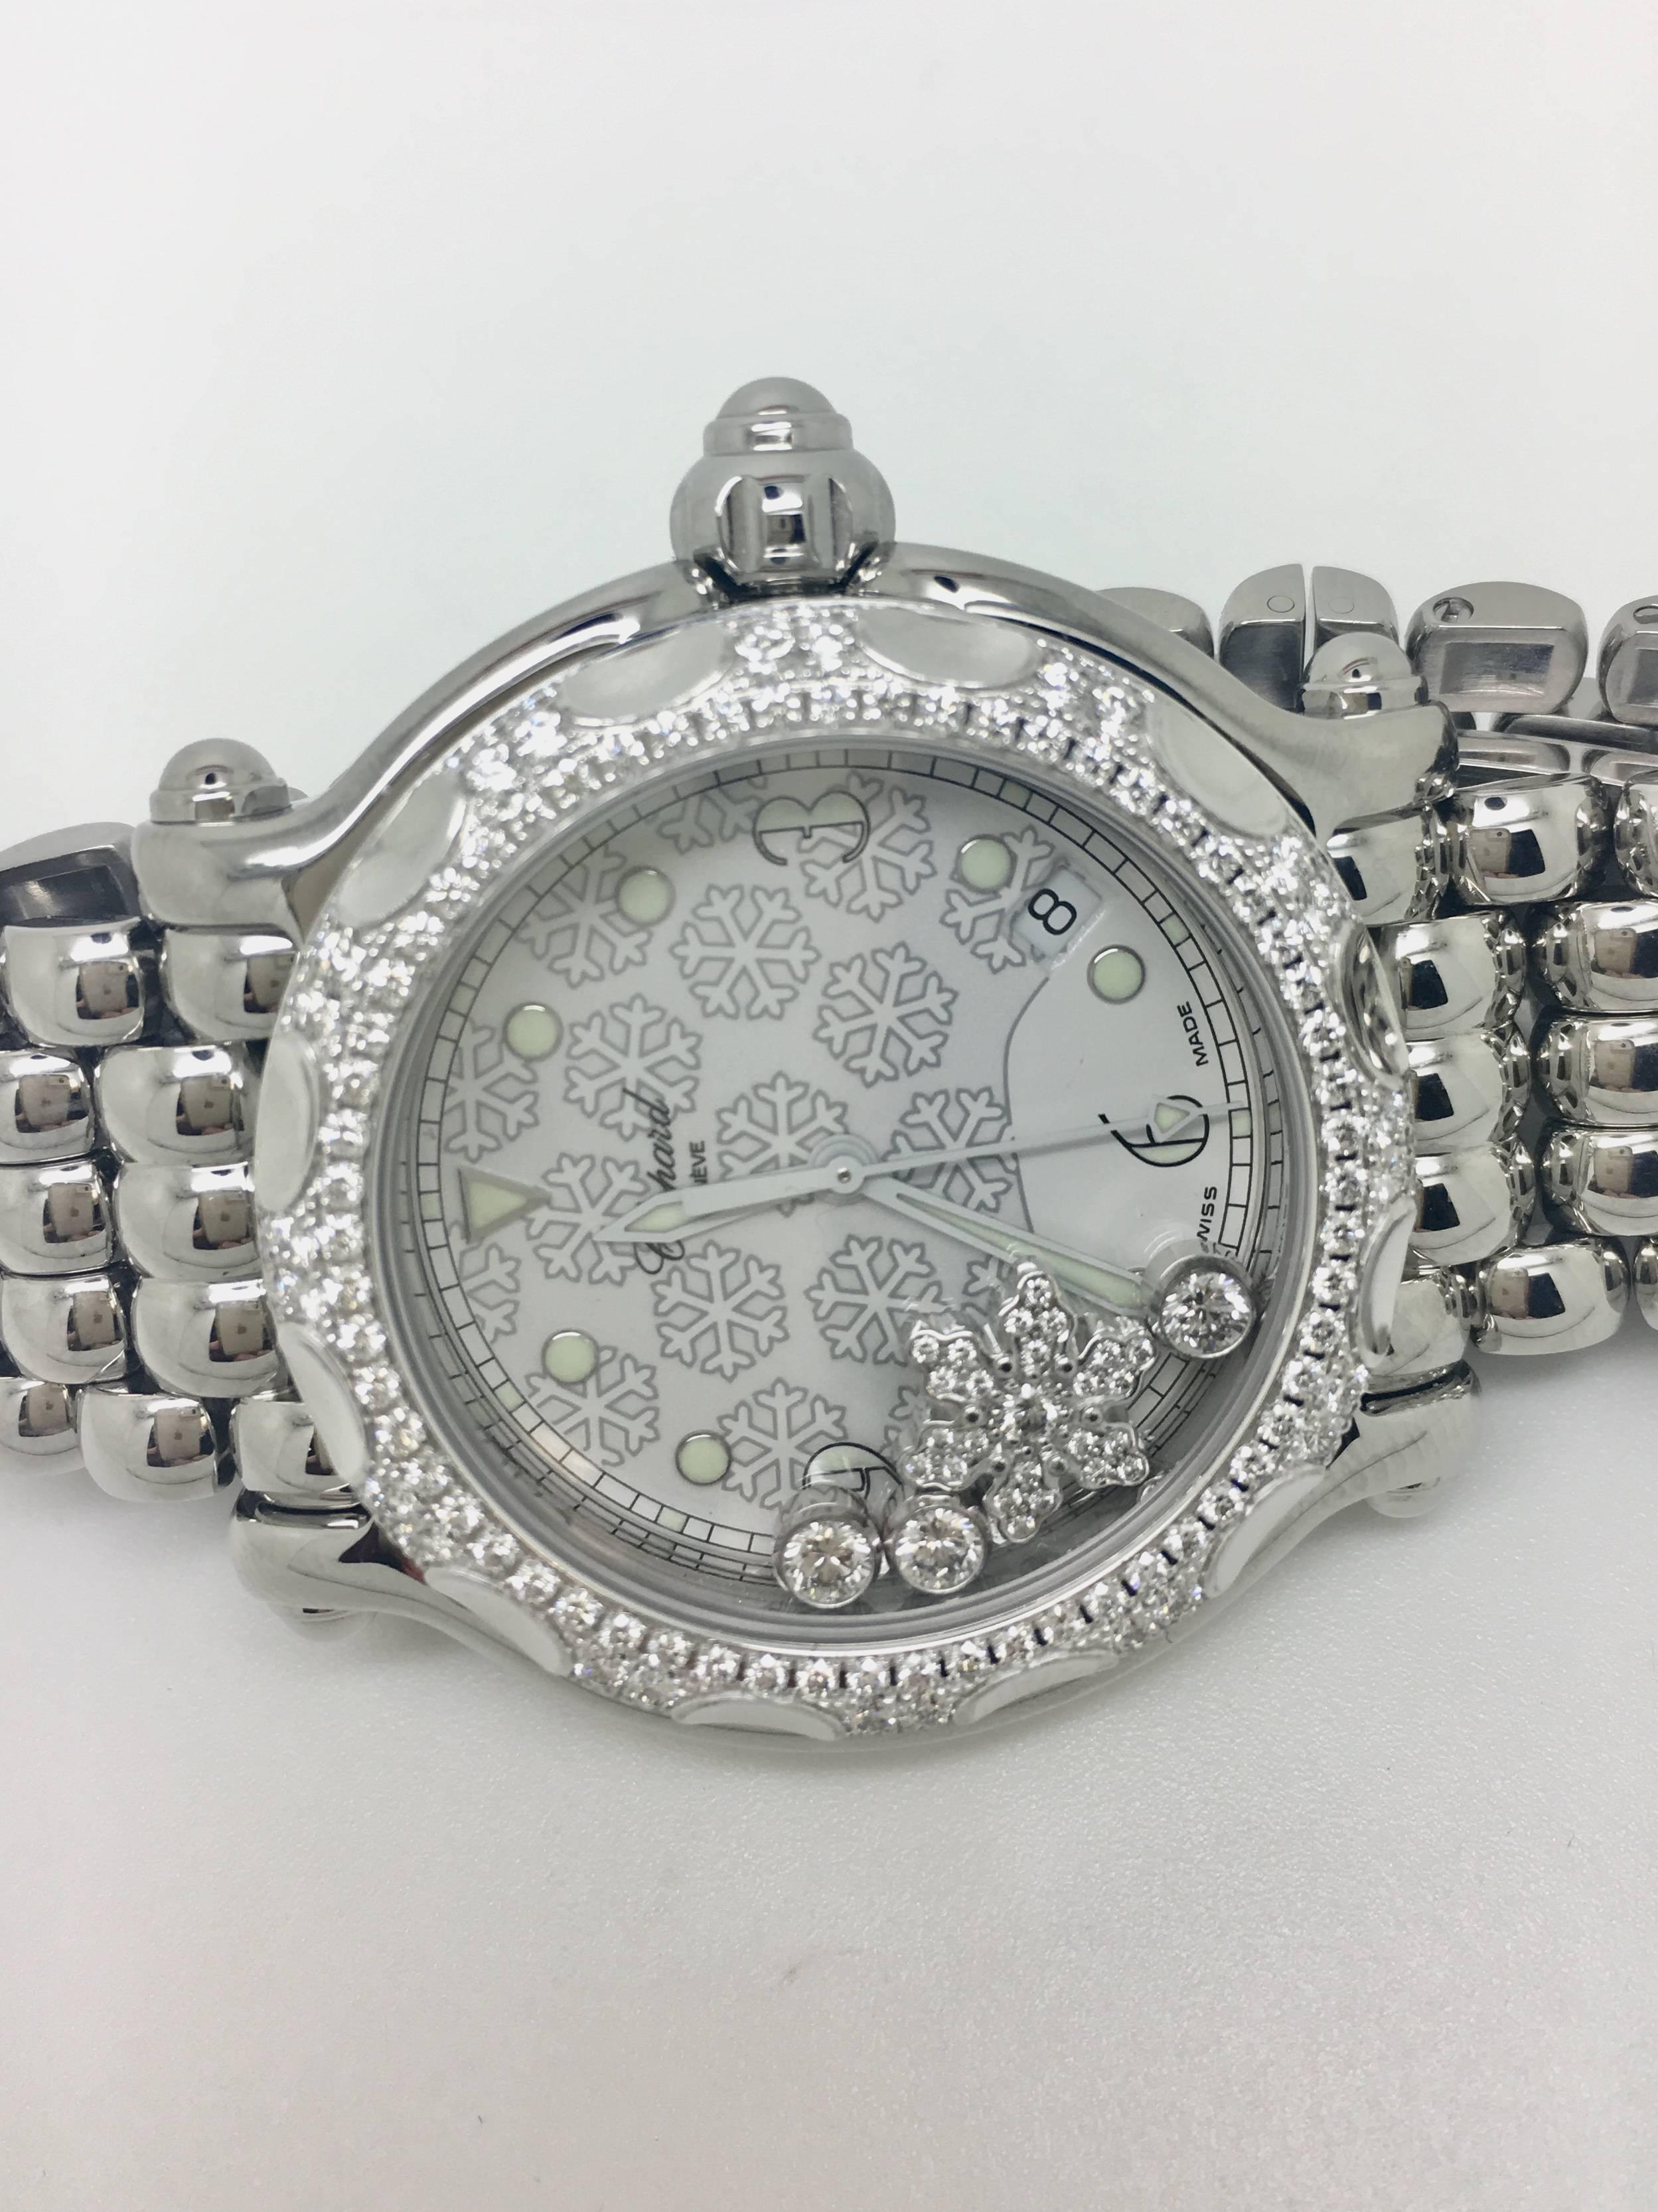 This Chopard 'Happy Sport Snowflake' watch has a stainless steel case and bracelet. White dial with luminous hands and luminous dots hour markers. Luminescent hands and dial markers. Date displays between the 4 and 5 o'clock position. This timepiece